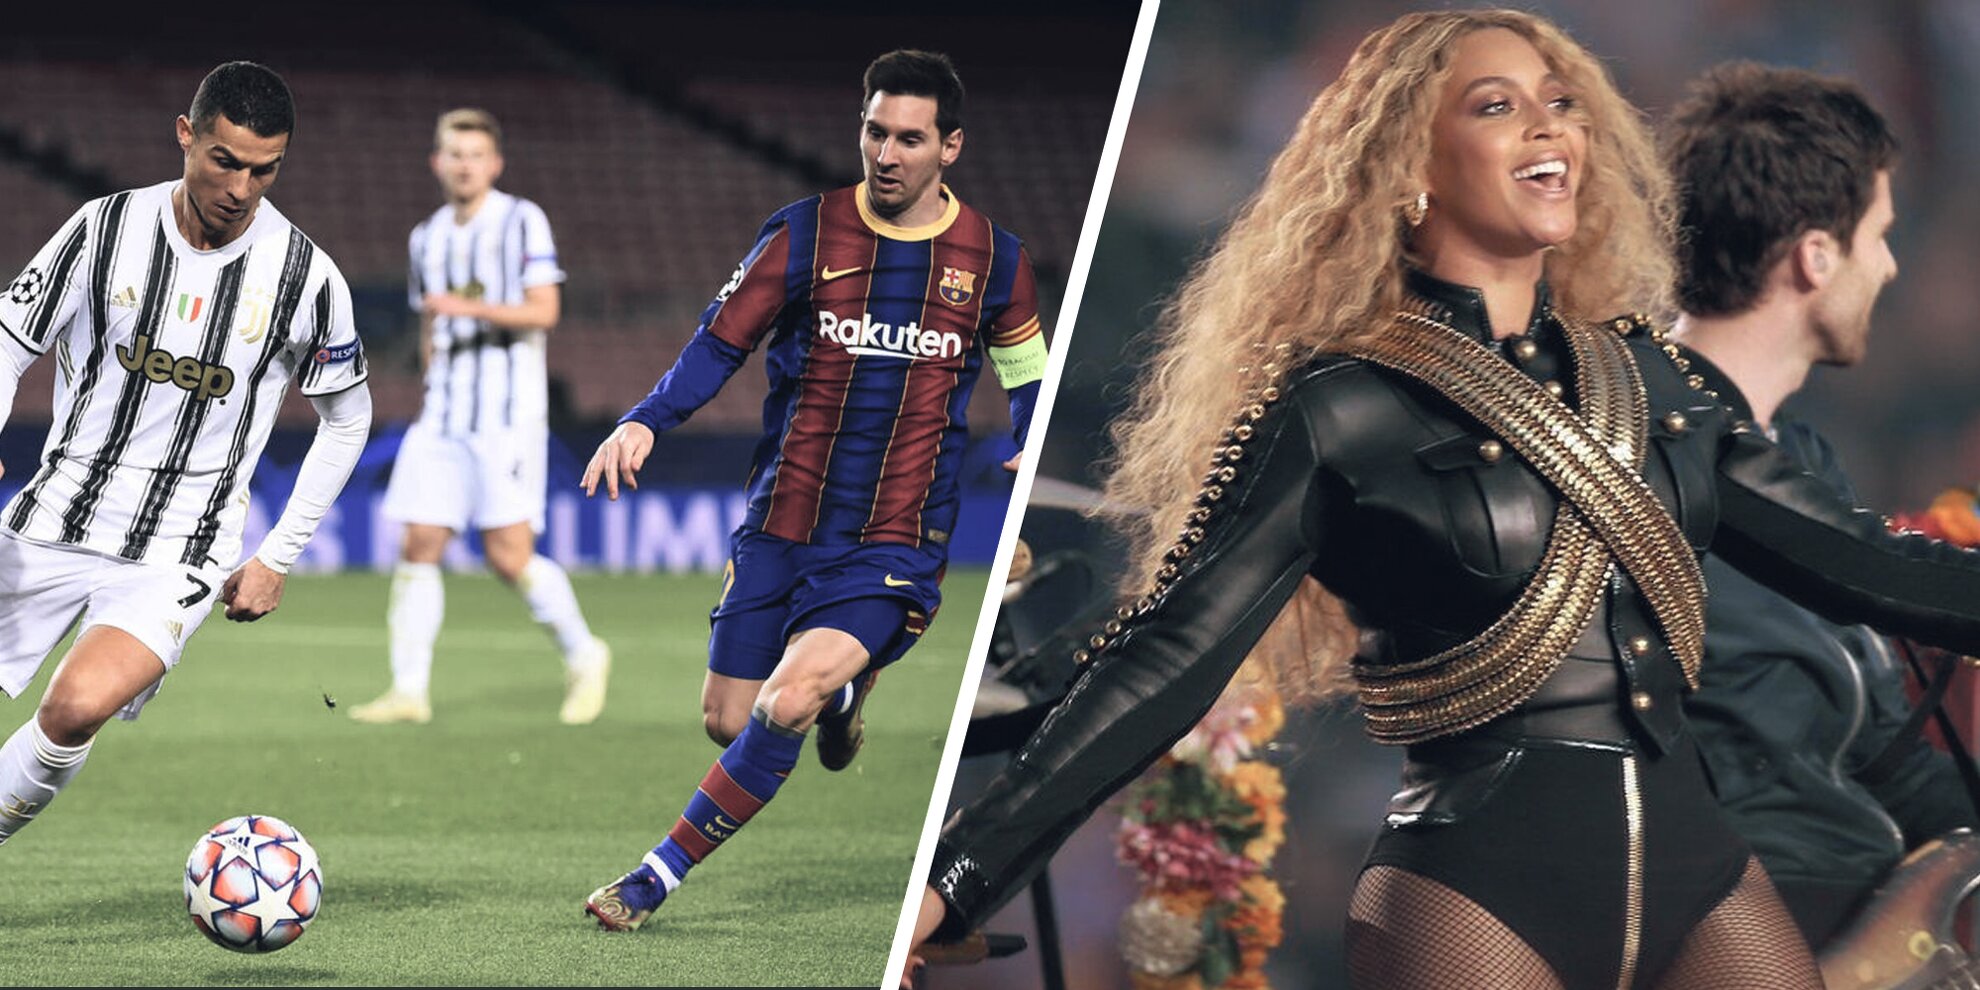 All you need to know about the feud between football Twitter and Beyonce